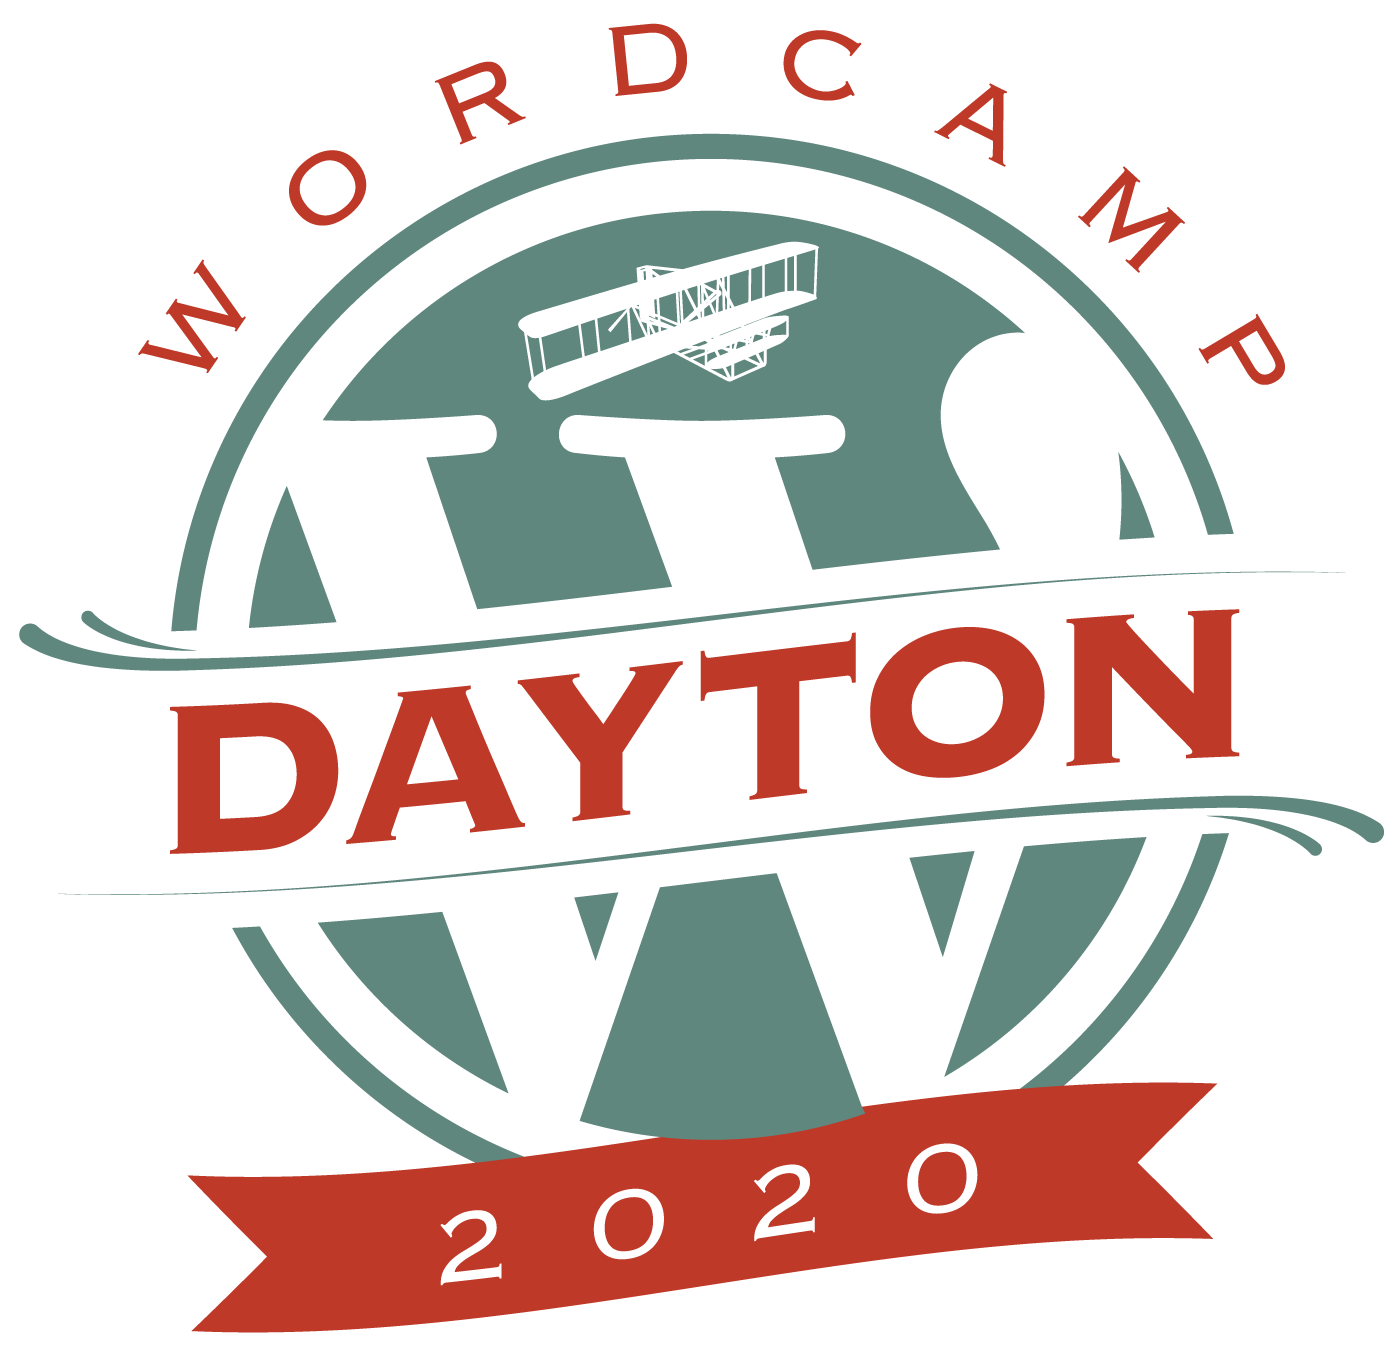 Announcing Wordcamp Dayton Will Be Held March 5 6 2020 2020